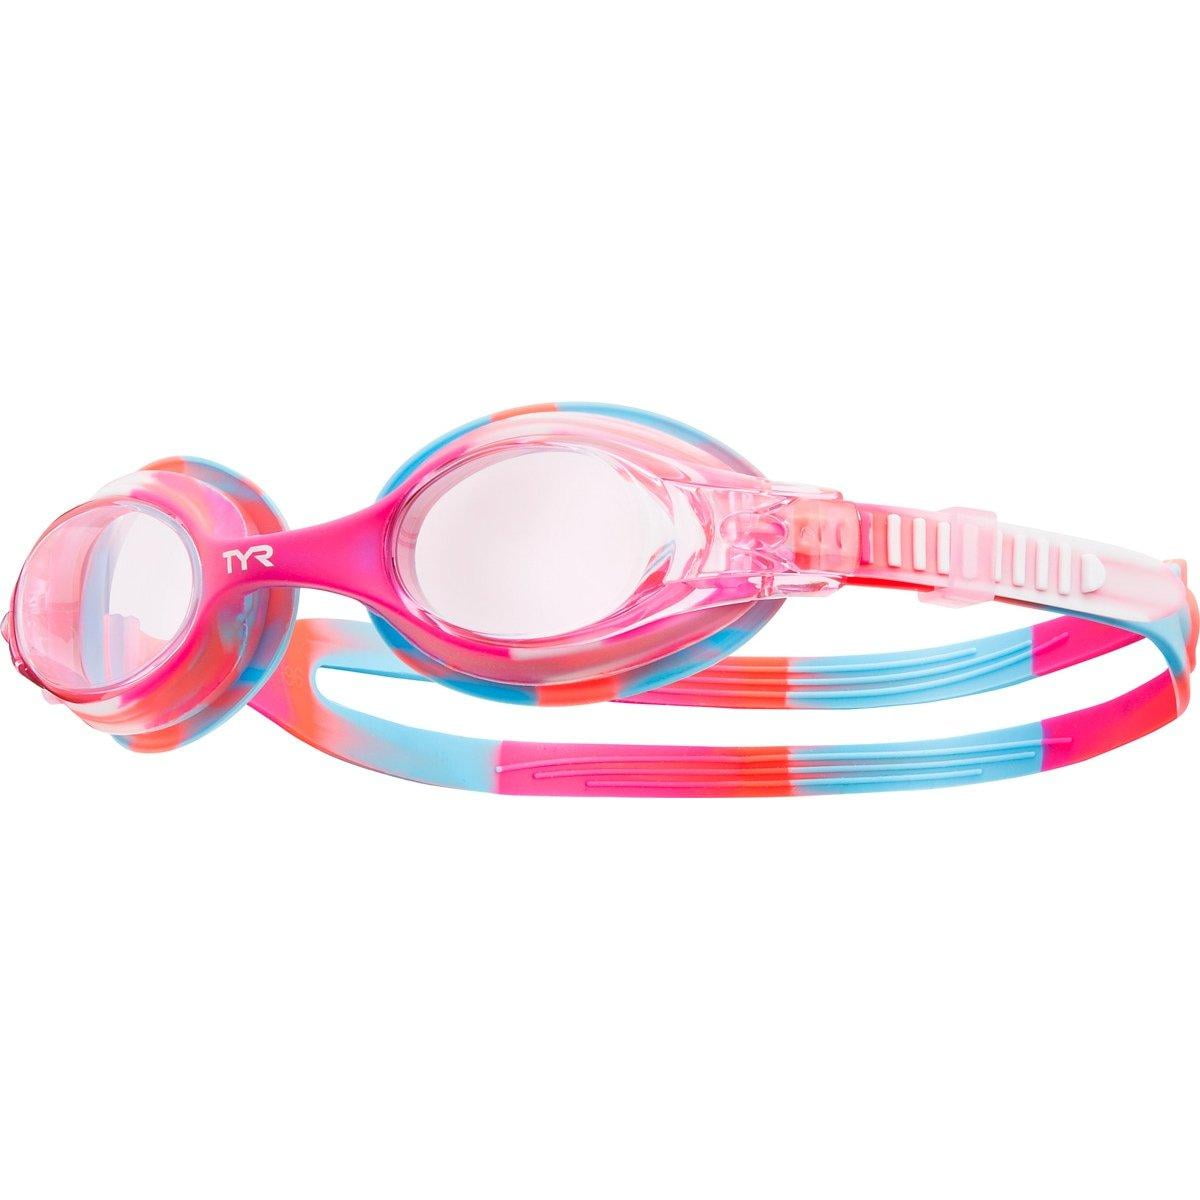 TYR Swimple Kids Tie Dye Goggle Pink-blue Frame/clear Lens for sale online 